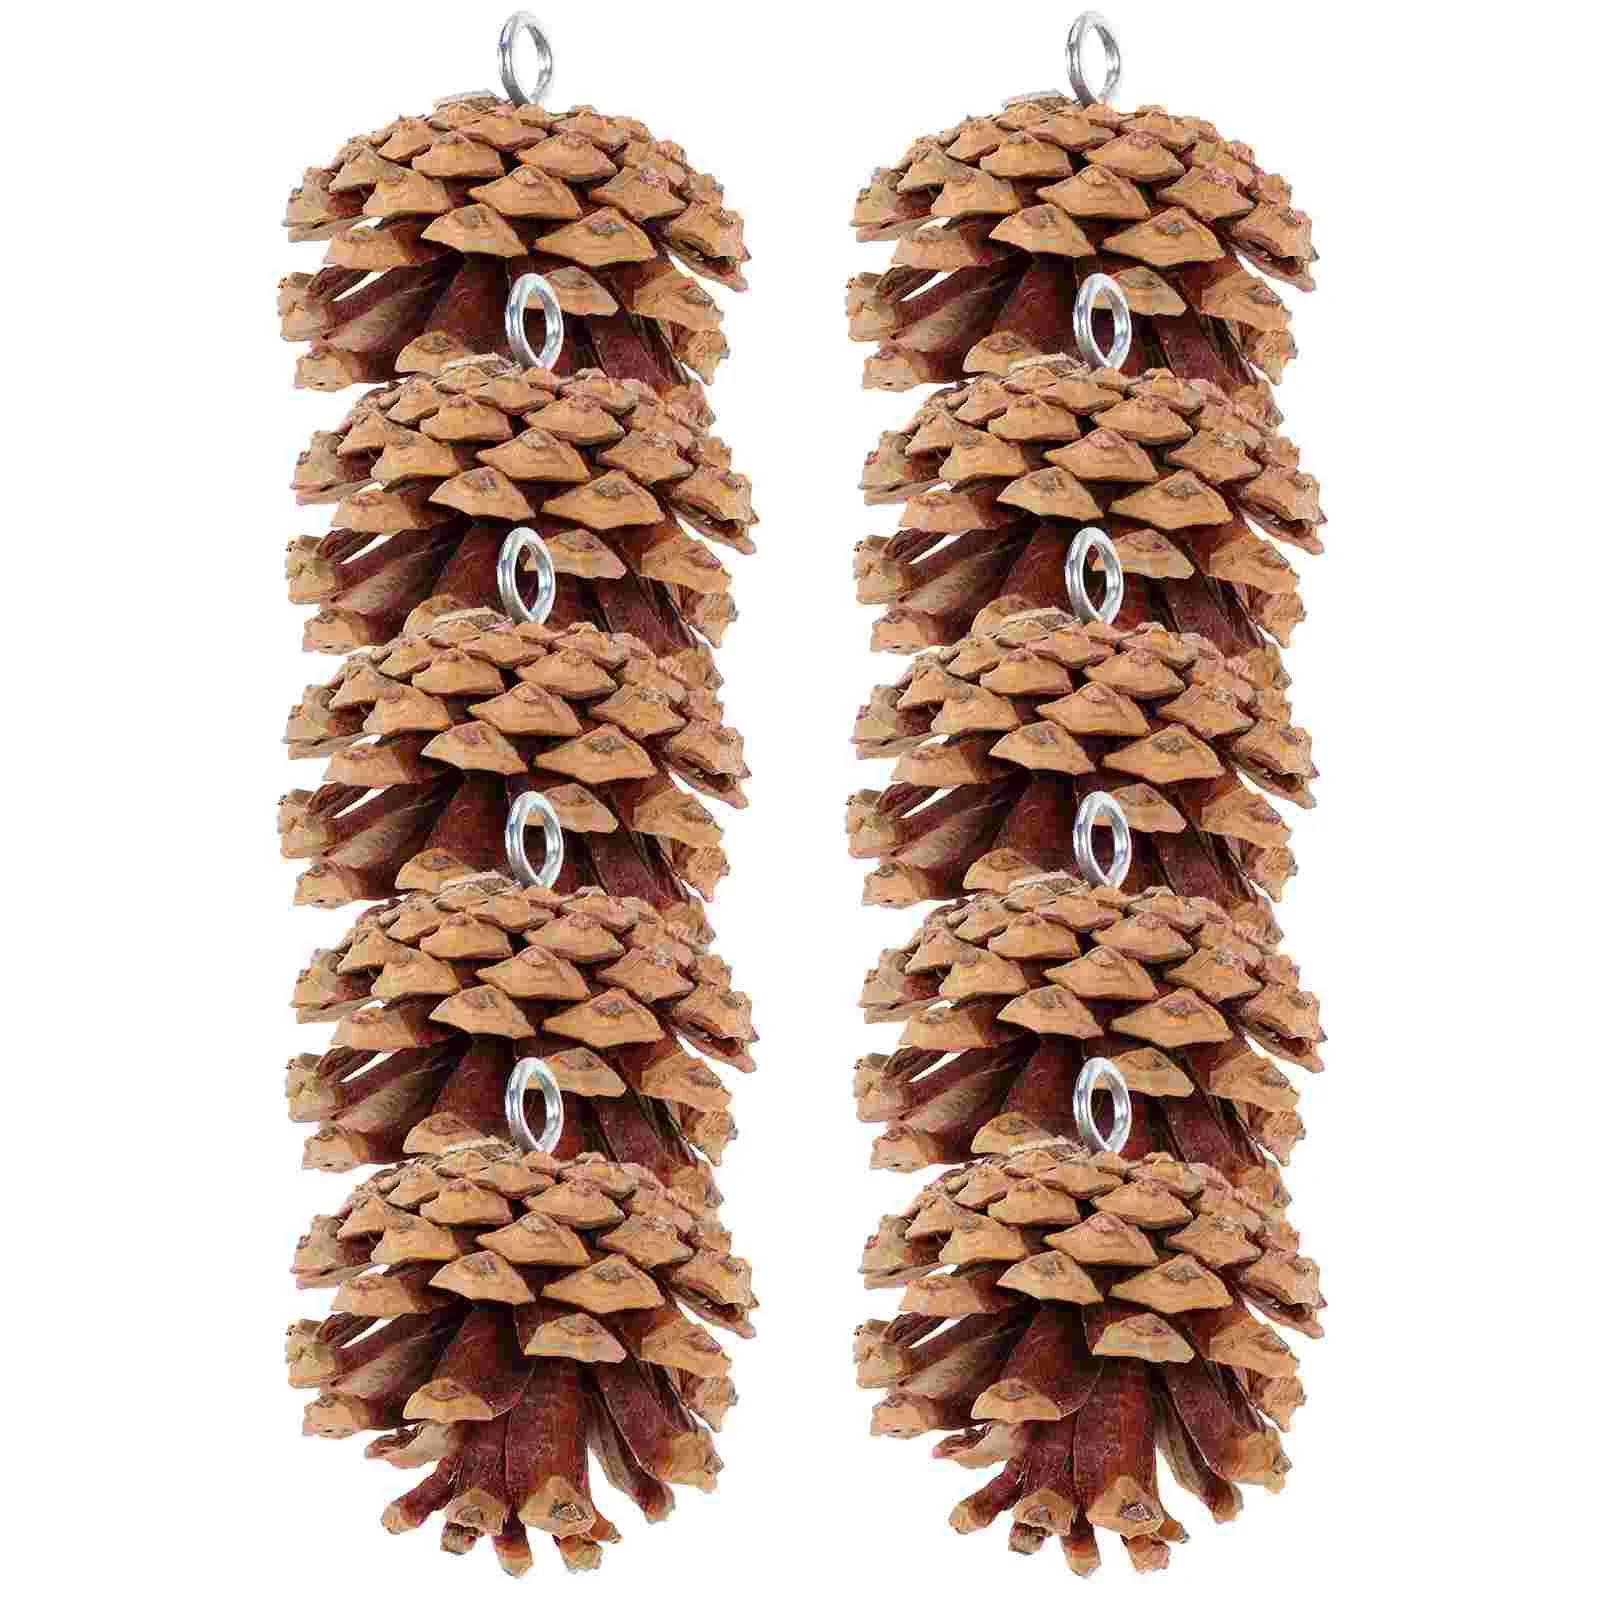 

Parrot Chewing Toy Teething Practical Bird Pet Accessories Hanging Parakeet Foraging Safety Funny Pine Cones Cage Bite